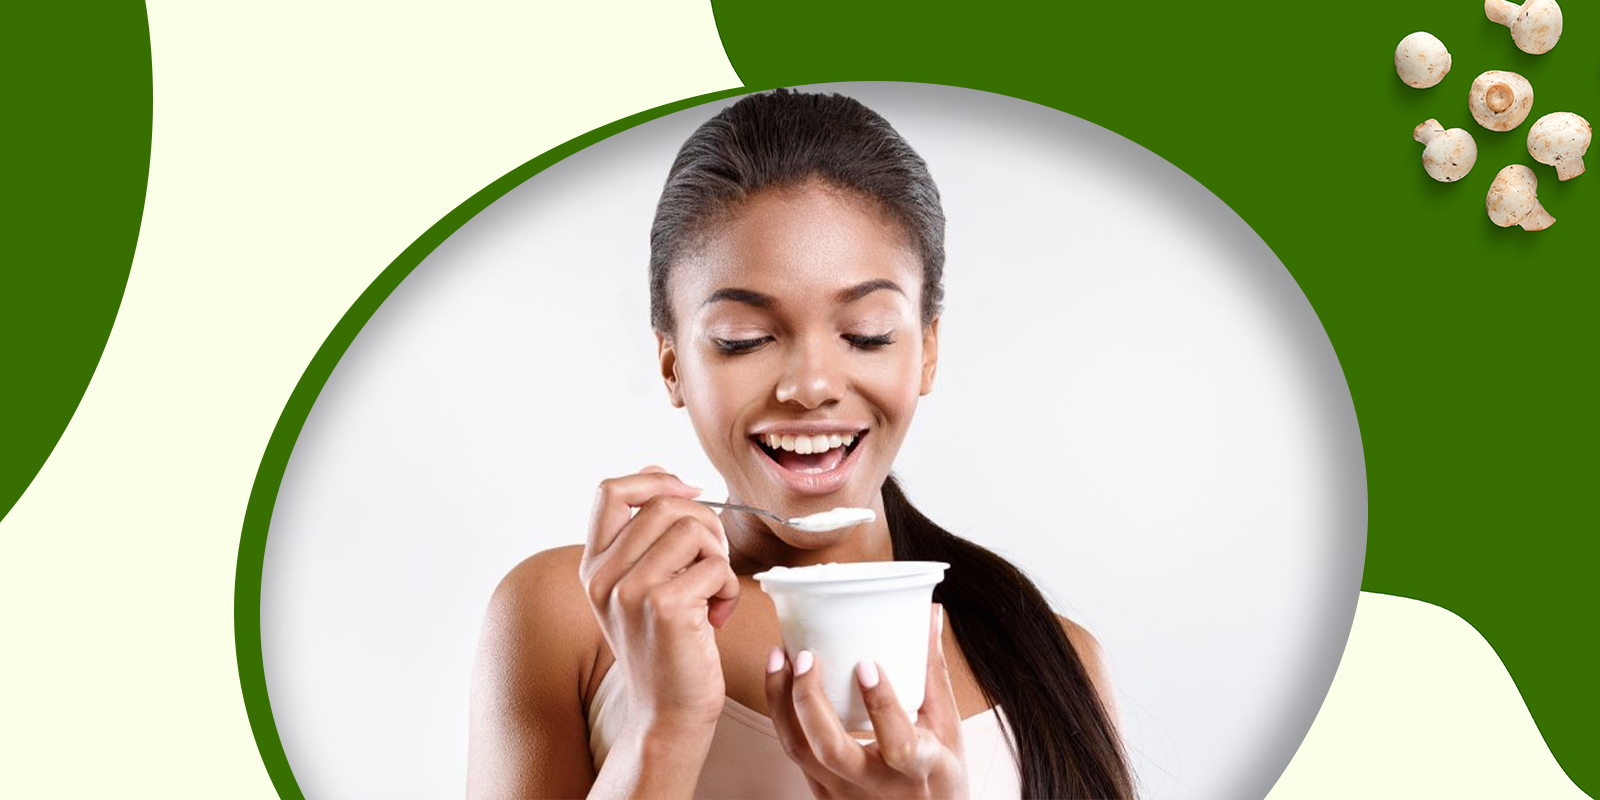 Why Choose Yogurt for Weight Loss?